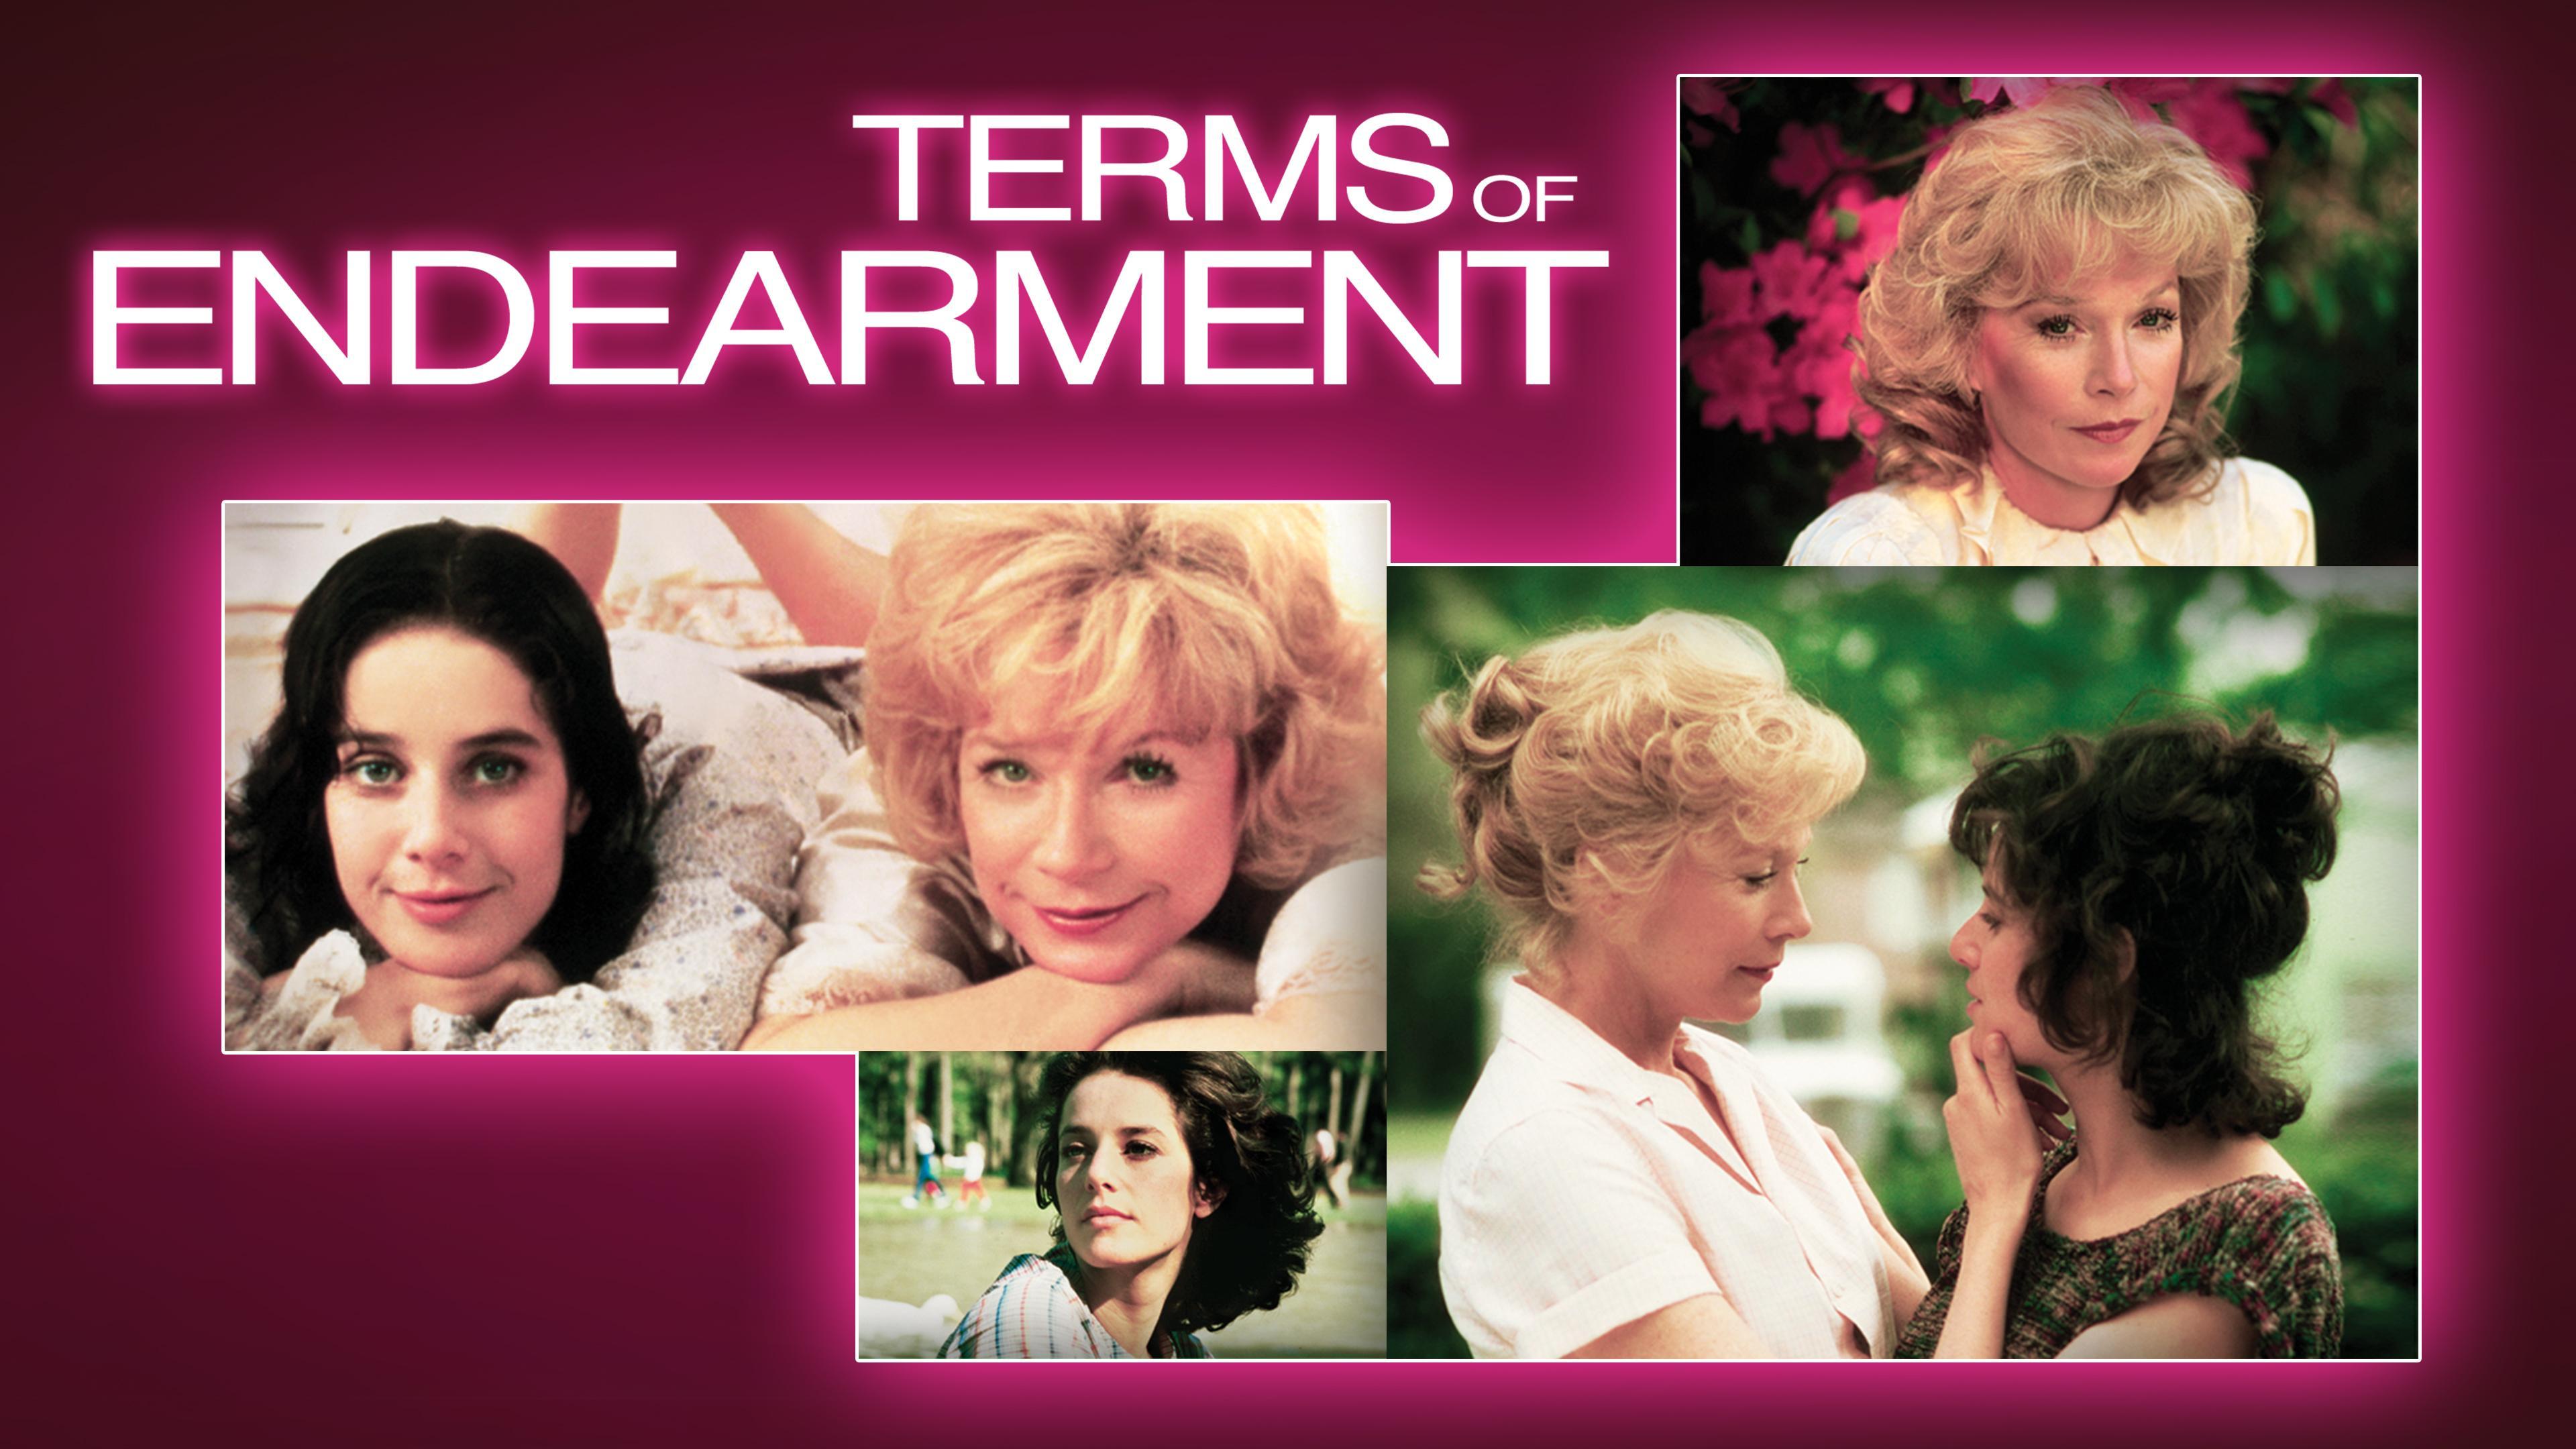 37-facts-about-the-movie-terms-of-endearment